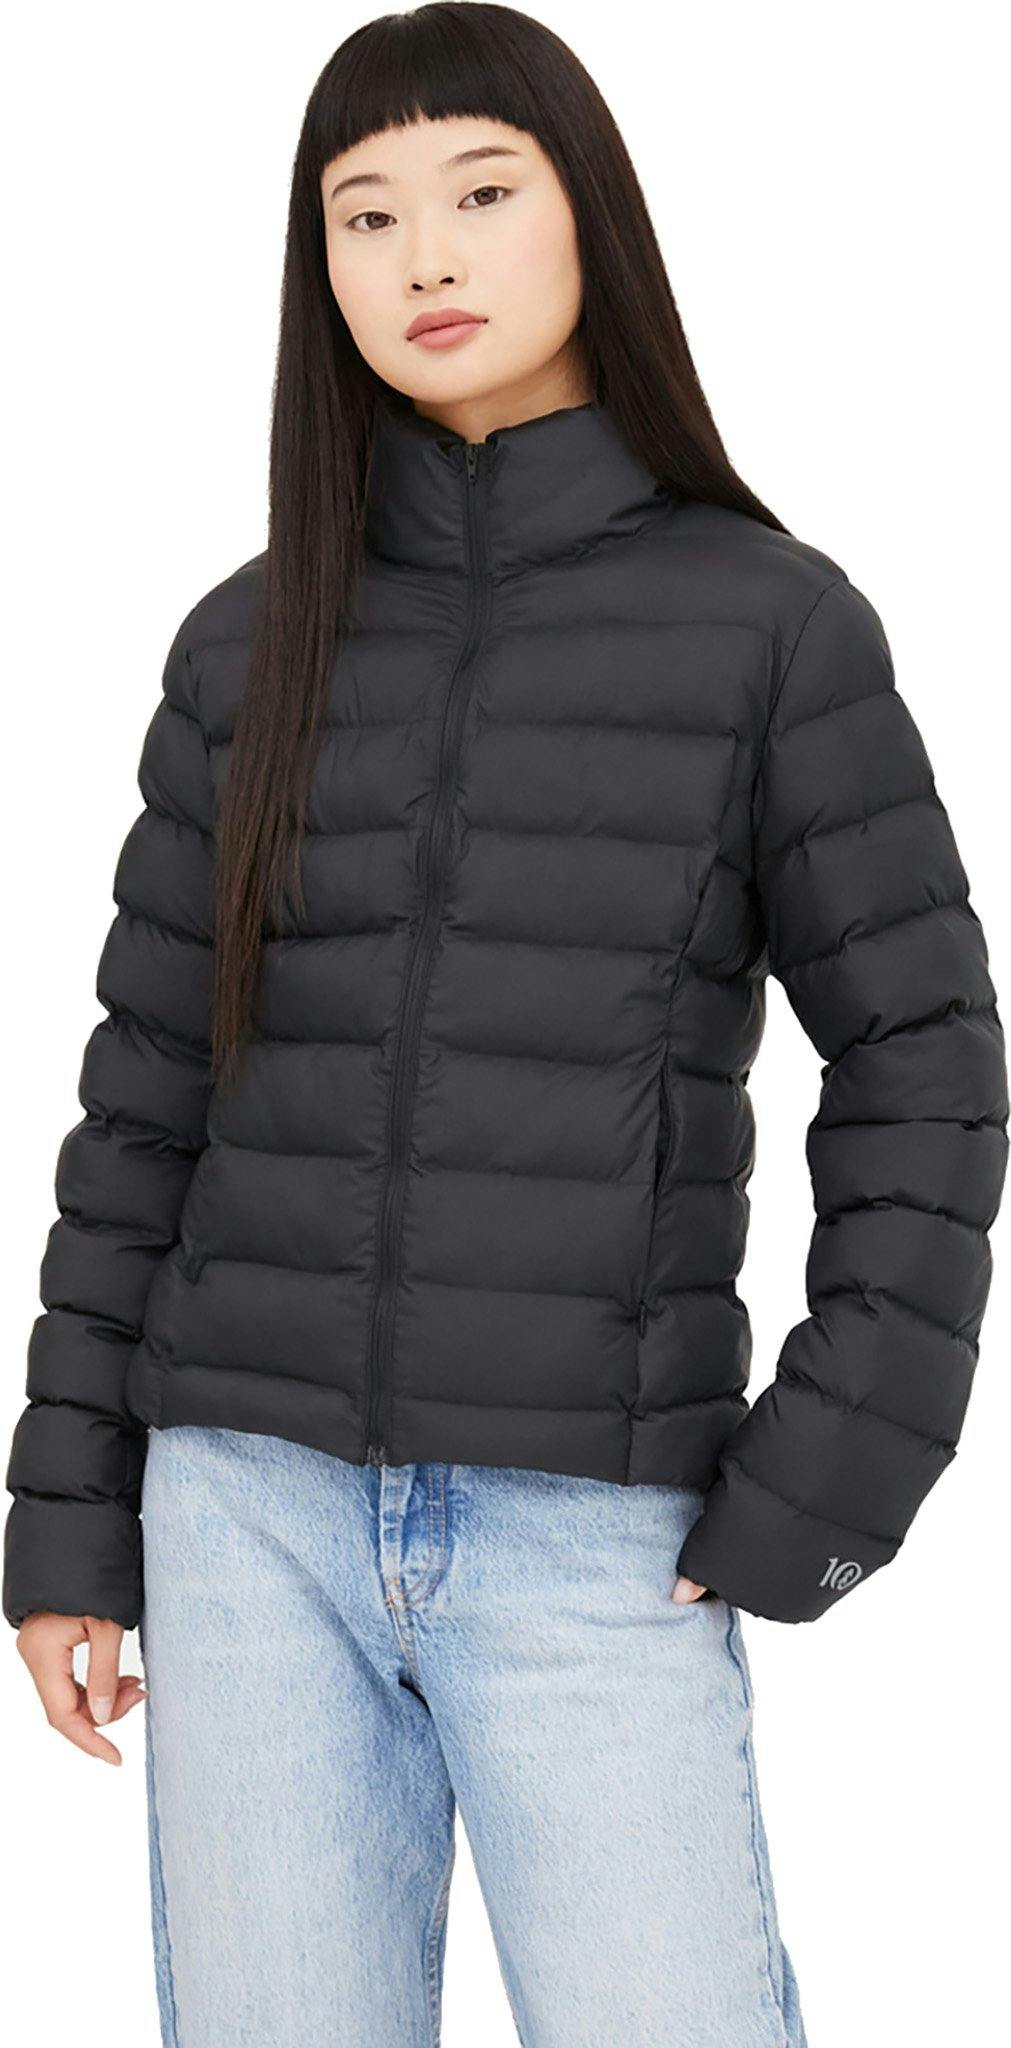 Product image for Packable Puffer Jacket - Women's